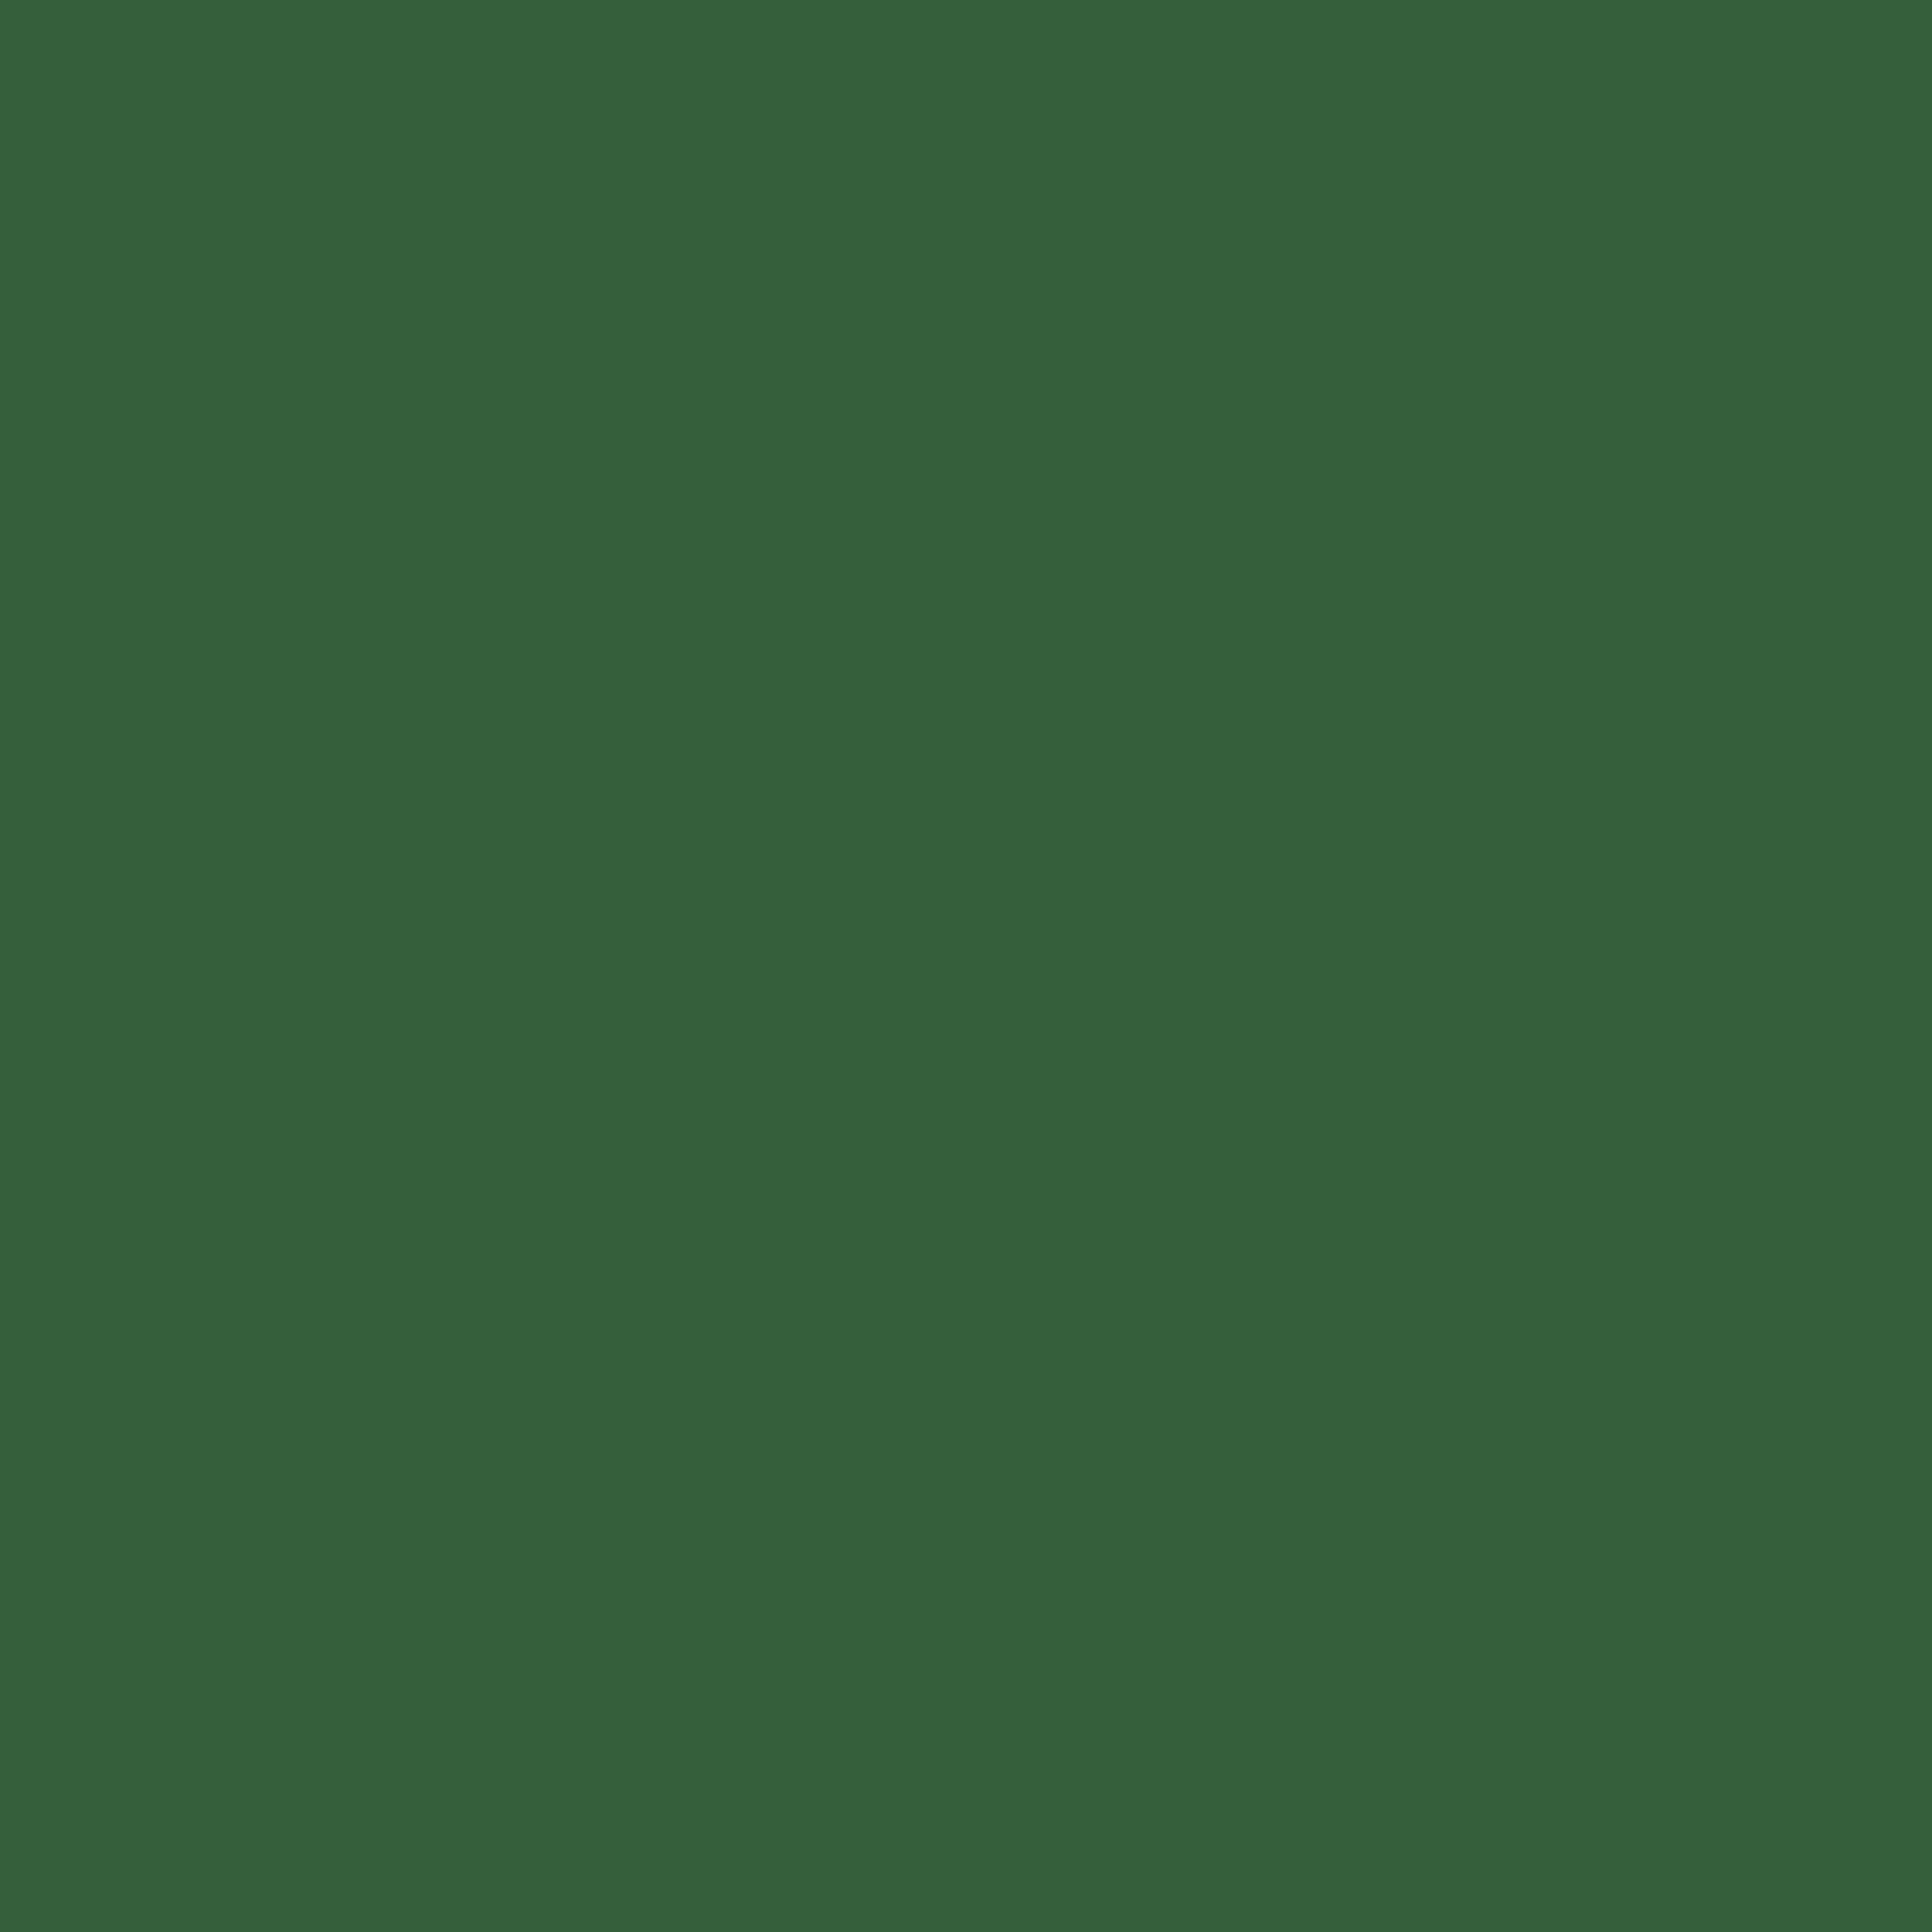 2732x2732 Hunter Green Solid Color Background